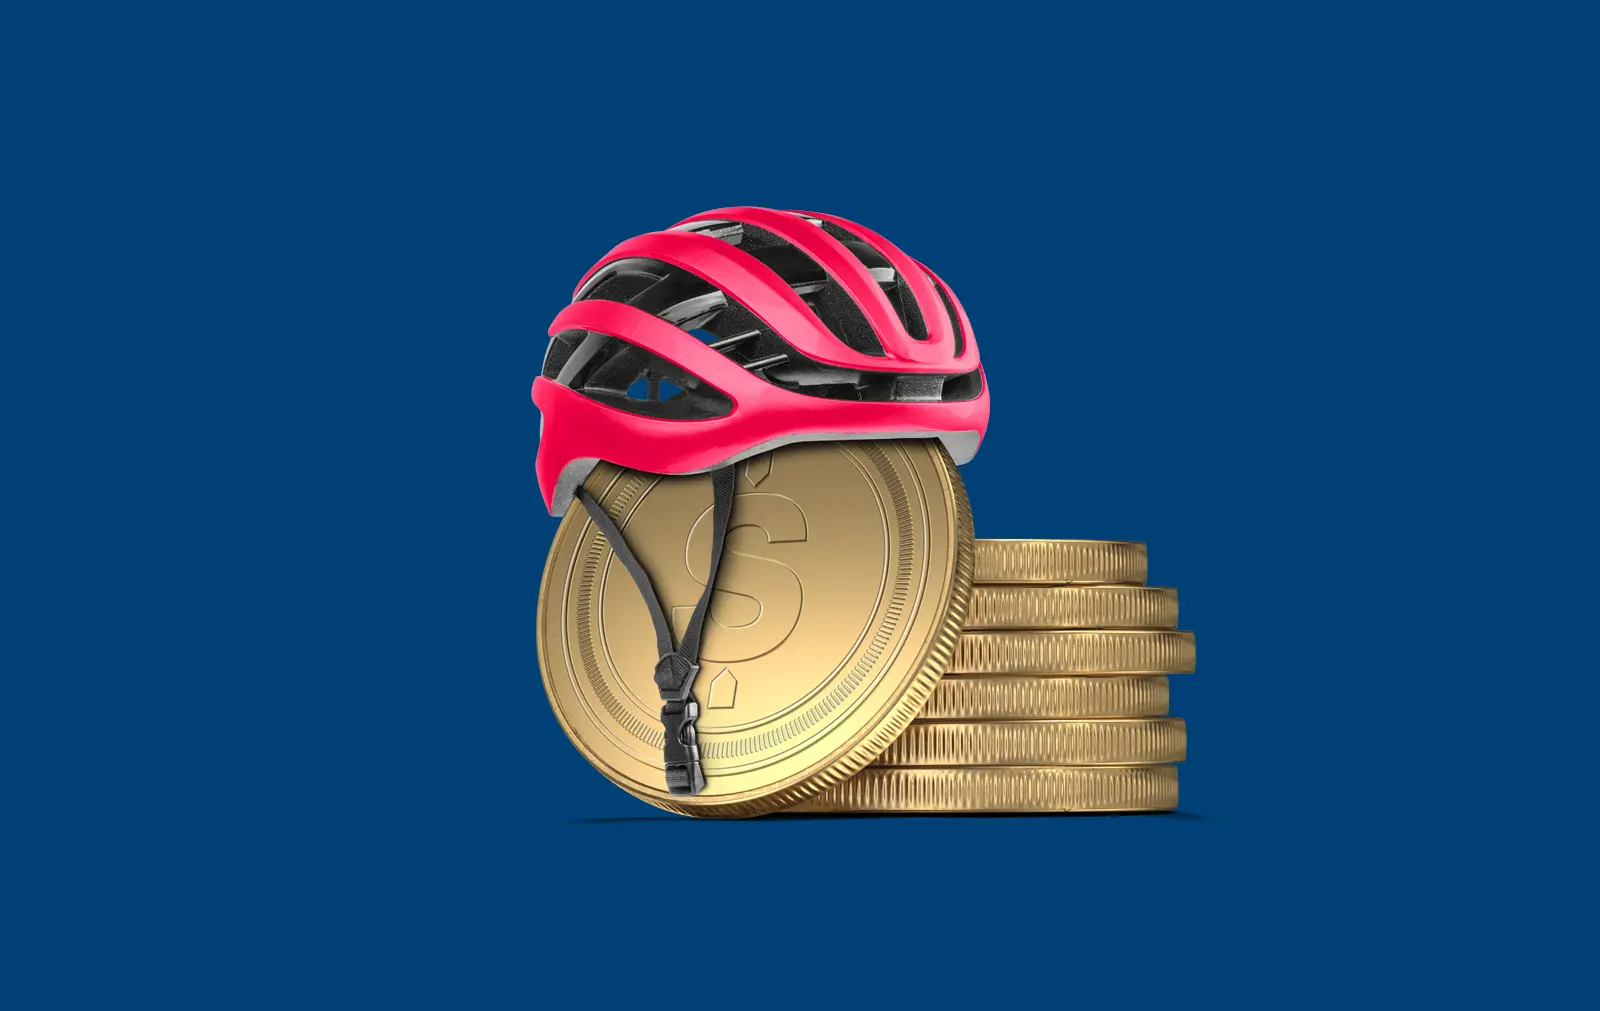 A bicycle helmet sits on top of a stack of gold coins.